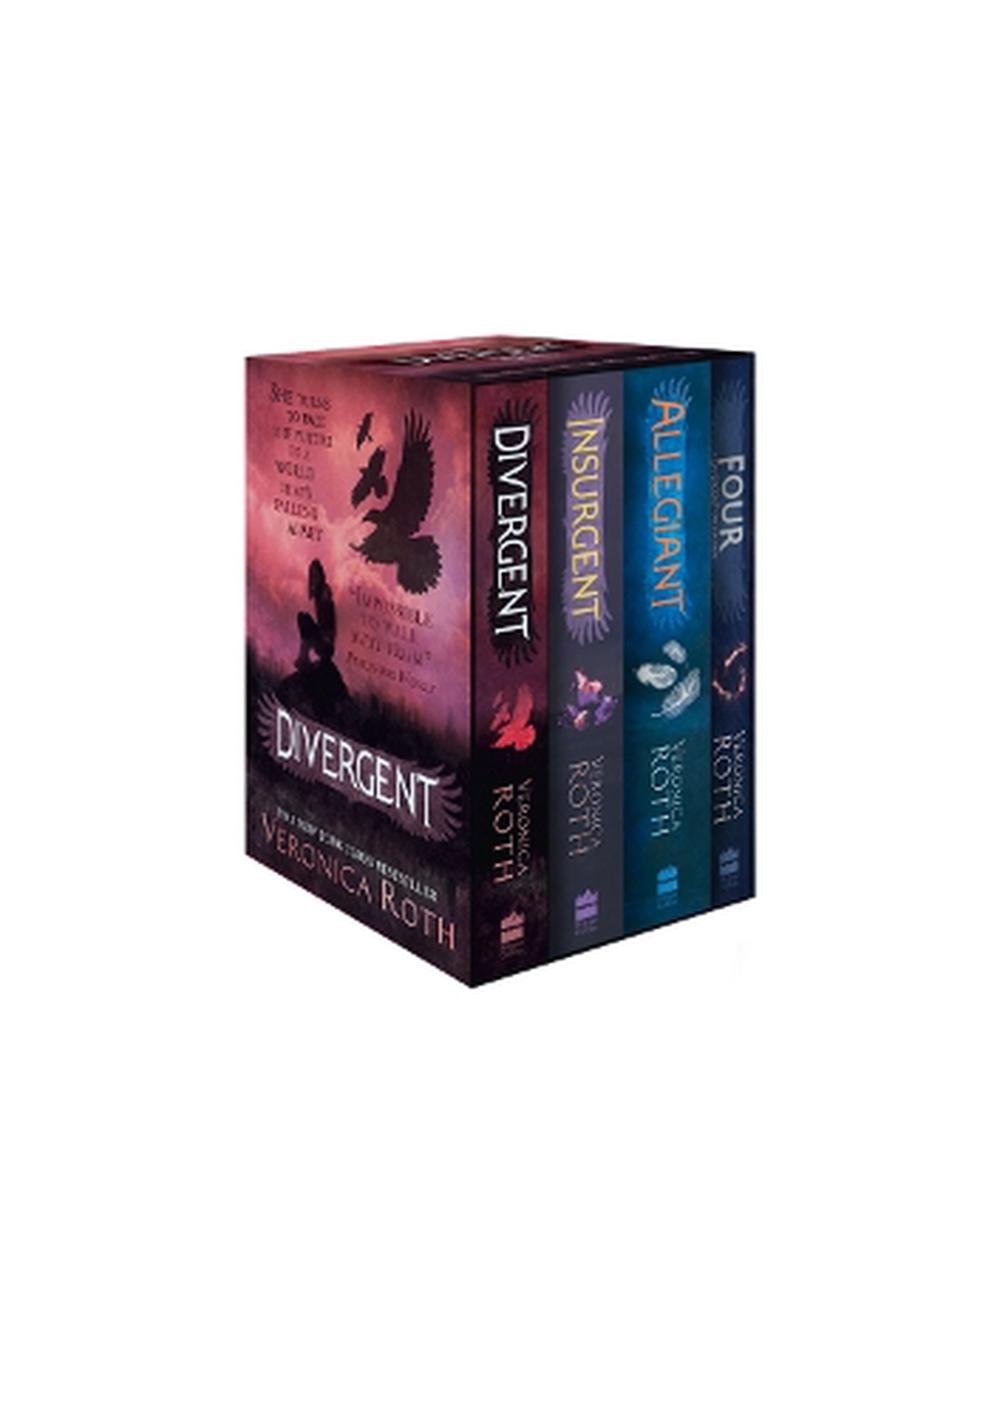 Divergent Series Box Set (books 1-4) by Veronica Roth, Book